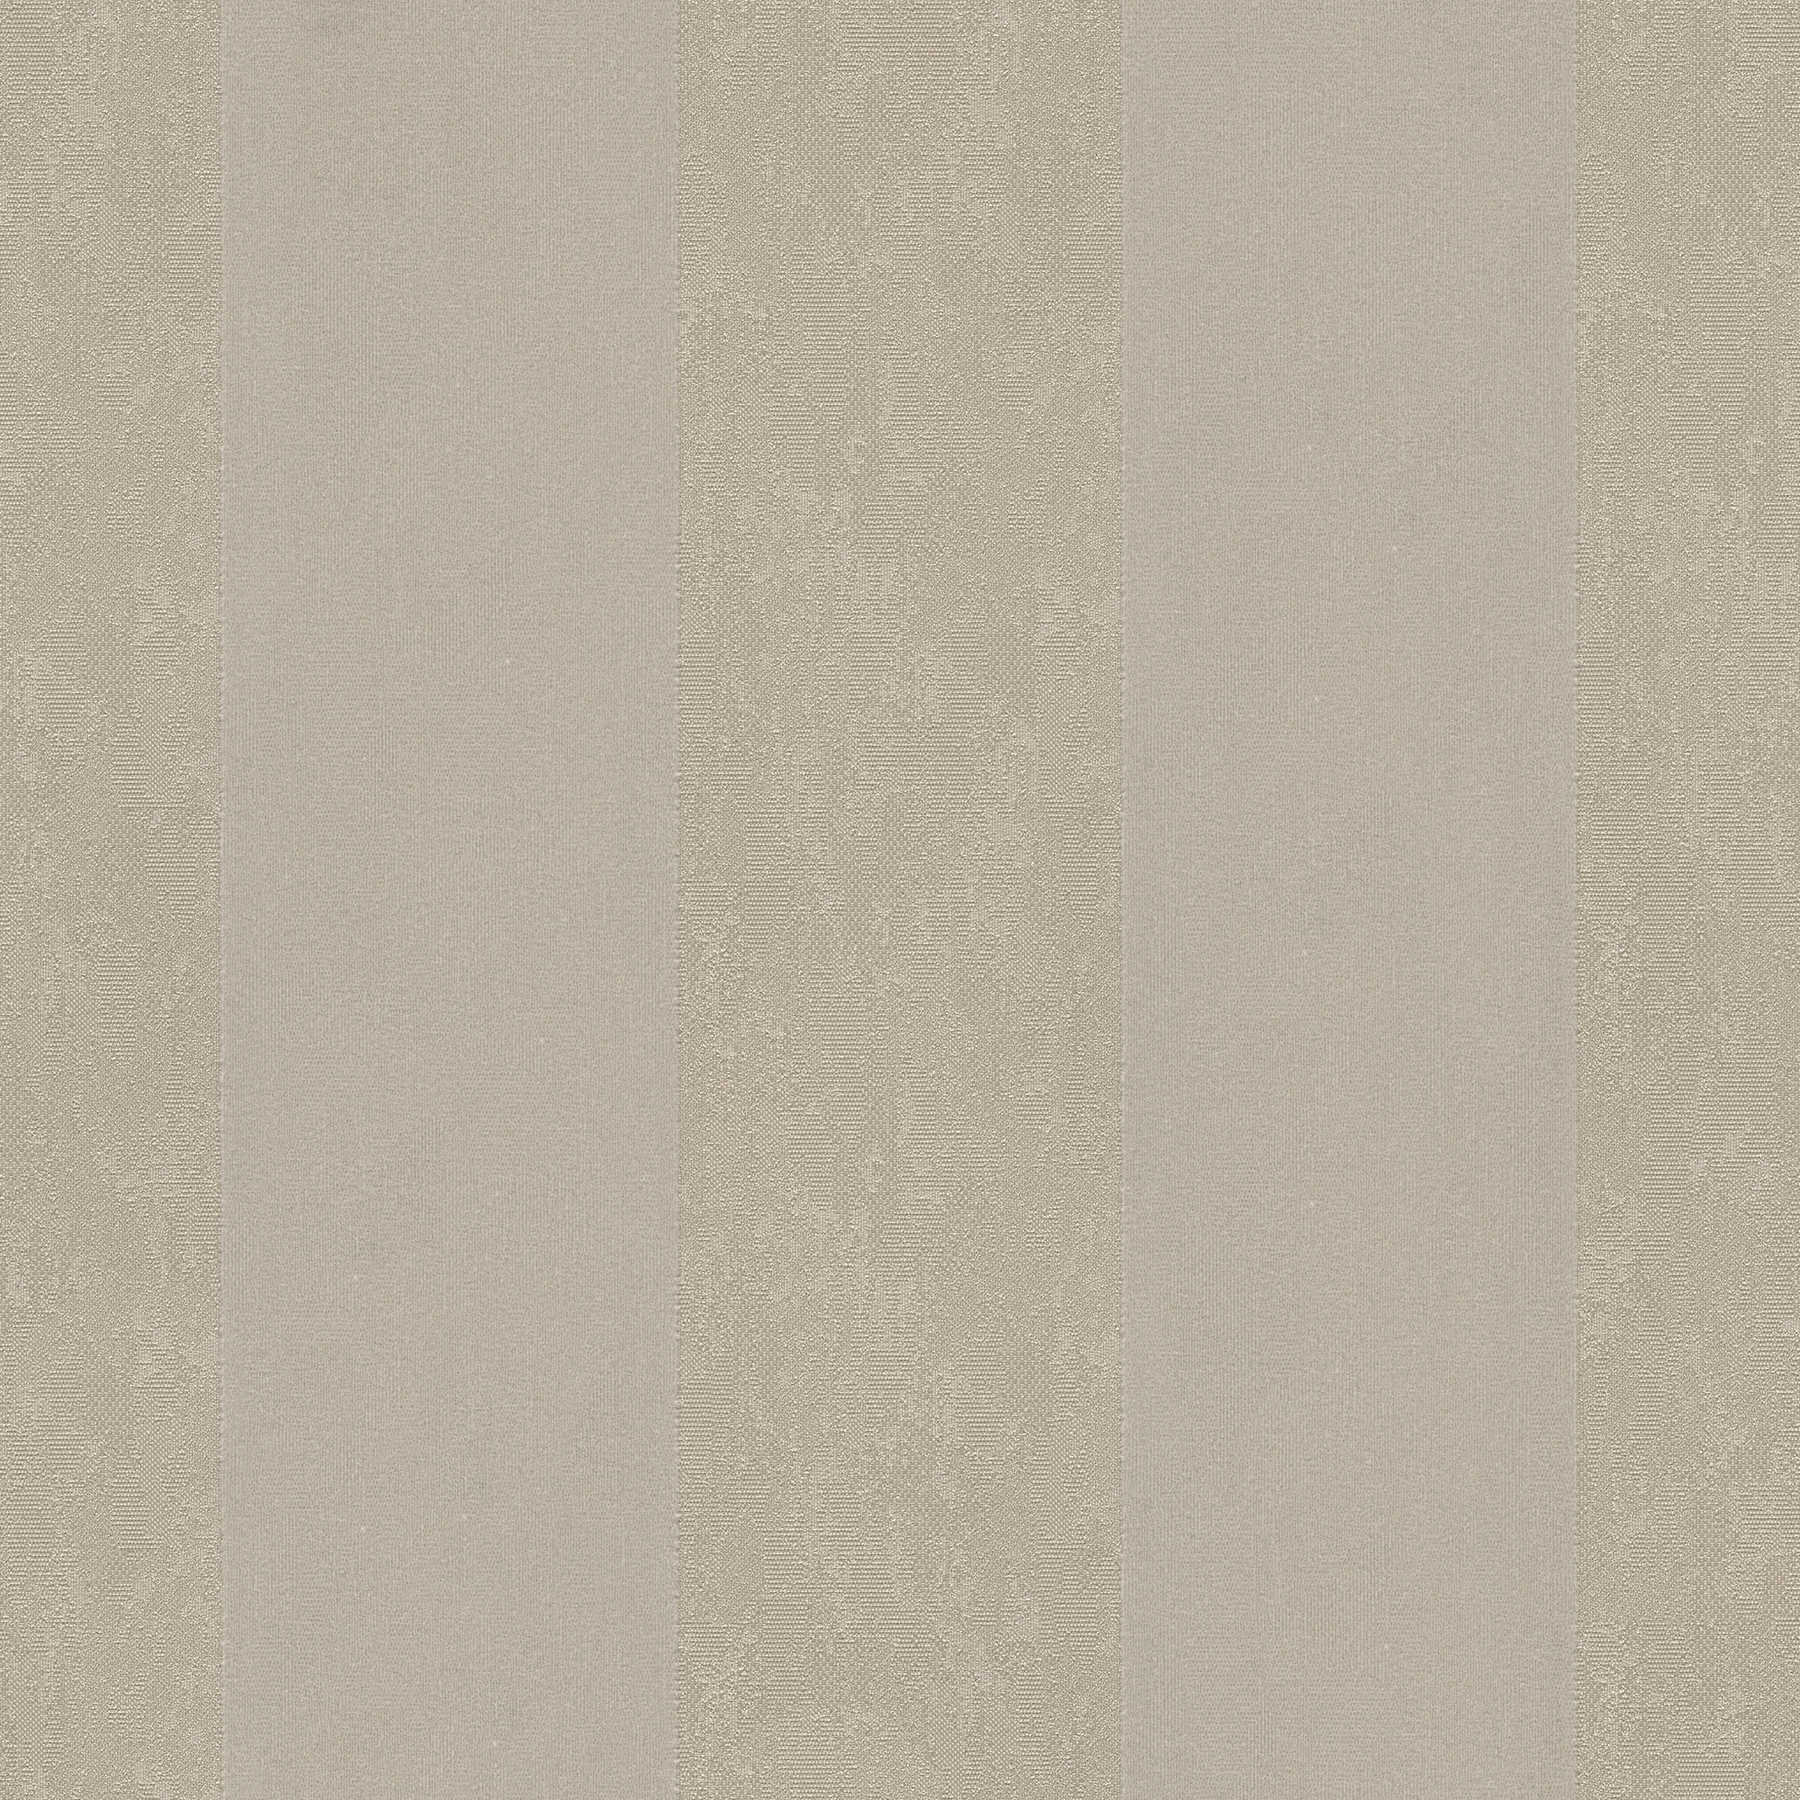 Striped wallpaper with texture embossing & metallic effect - brown
